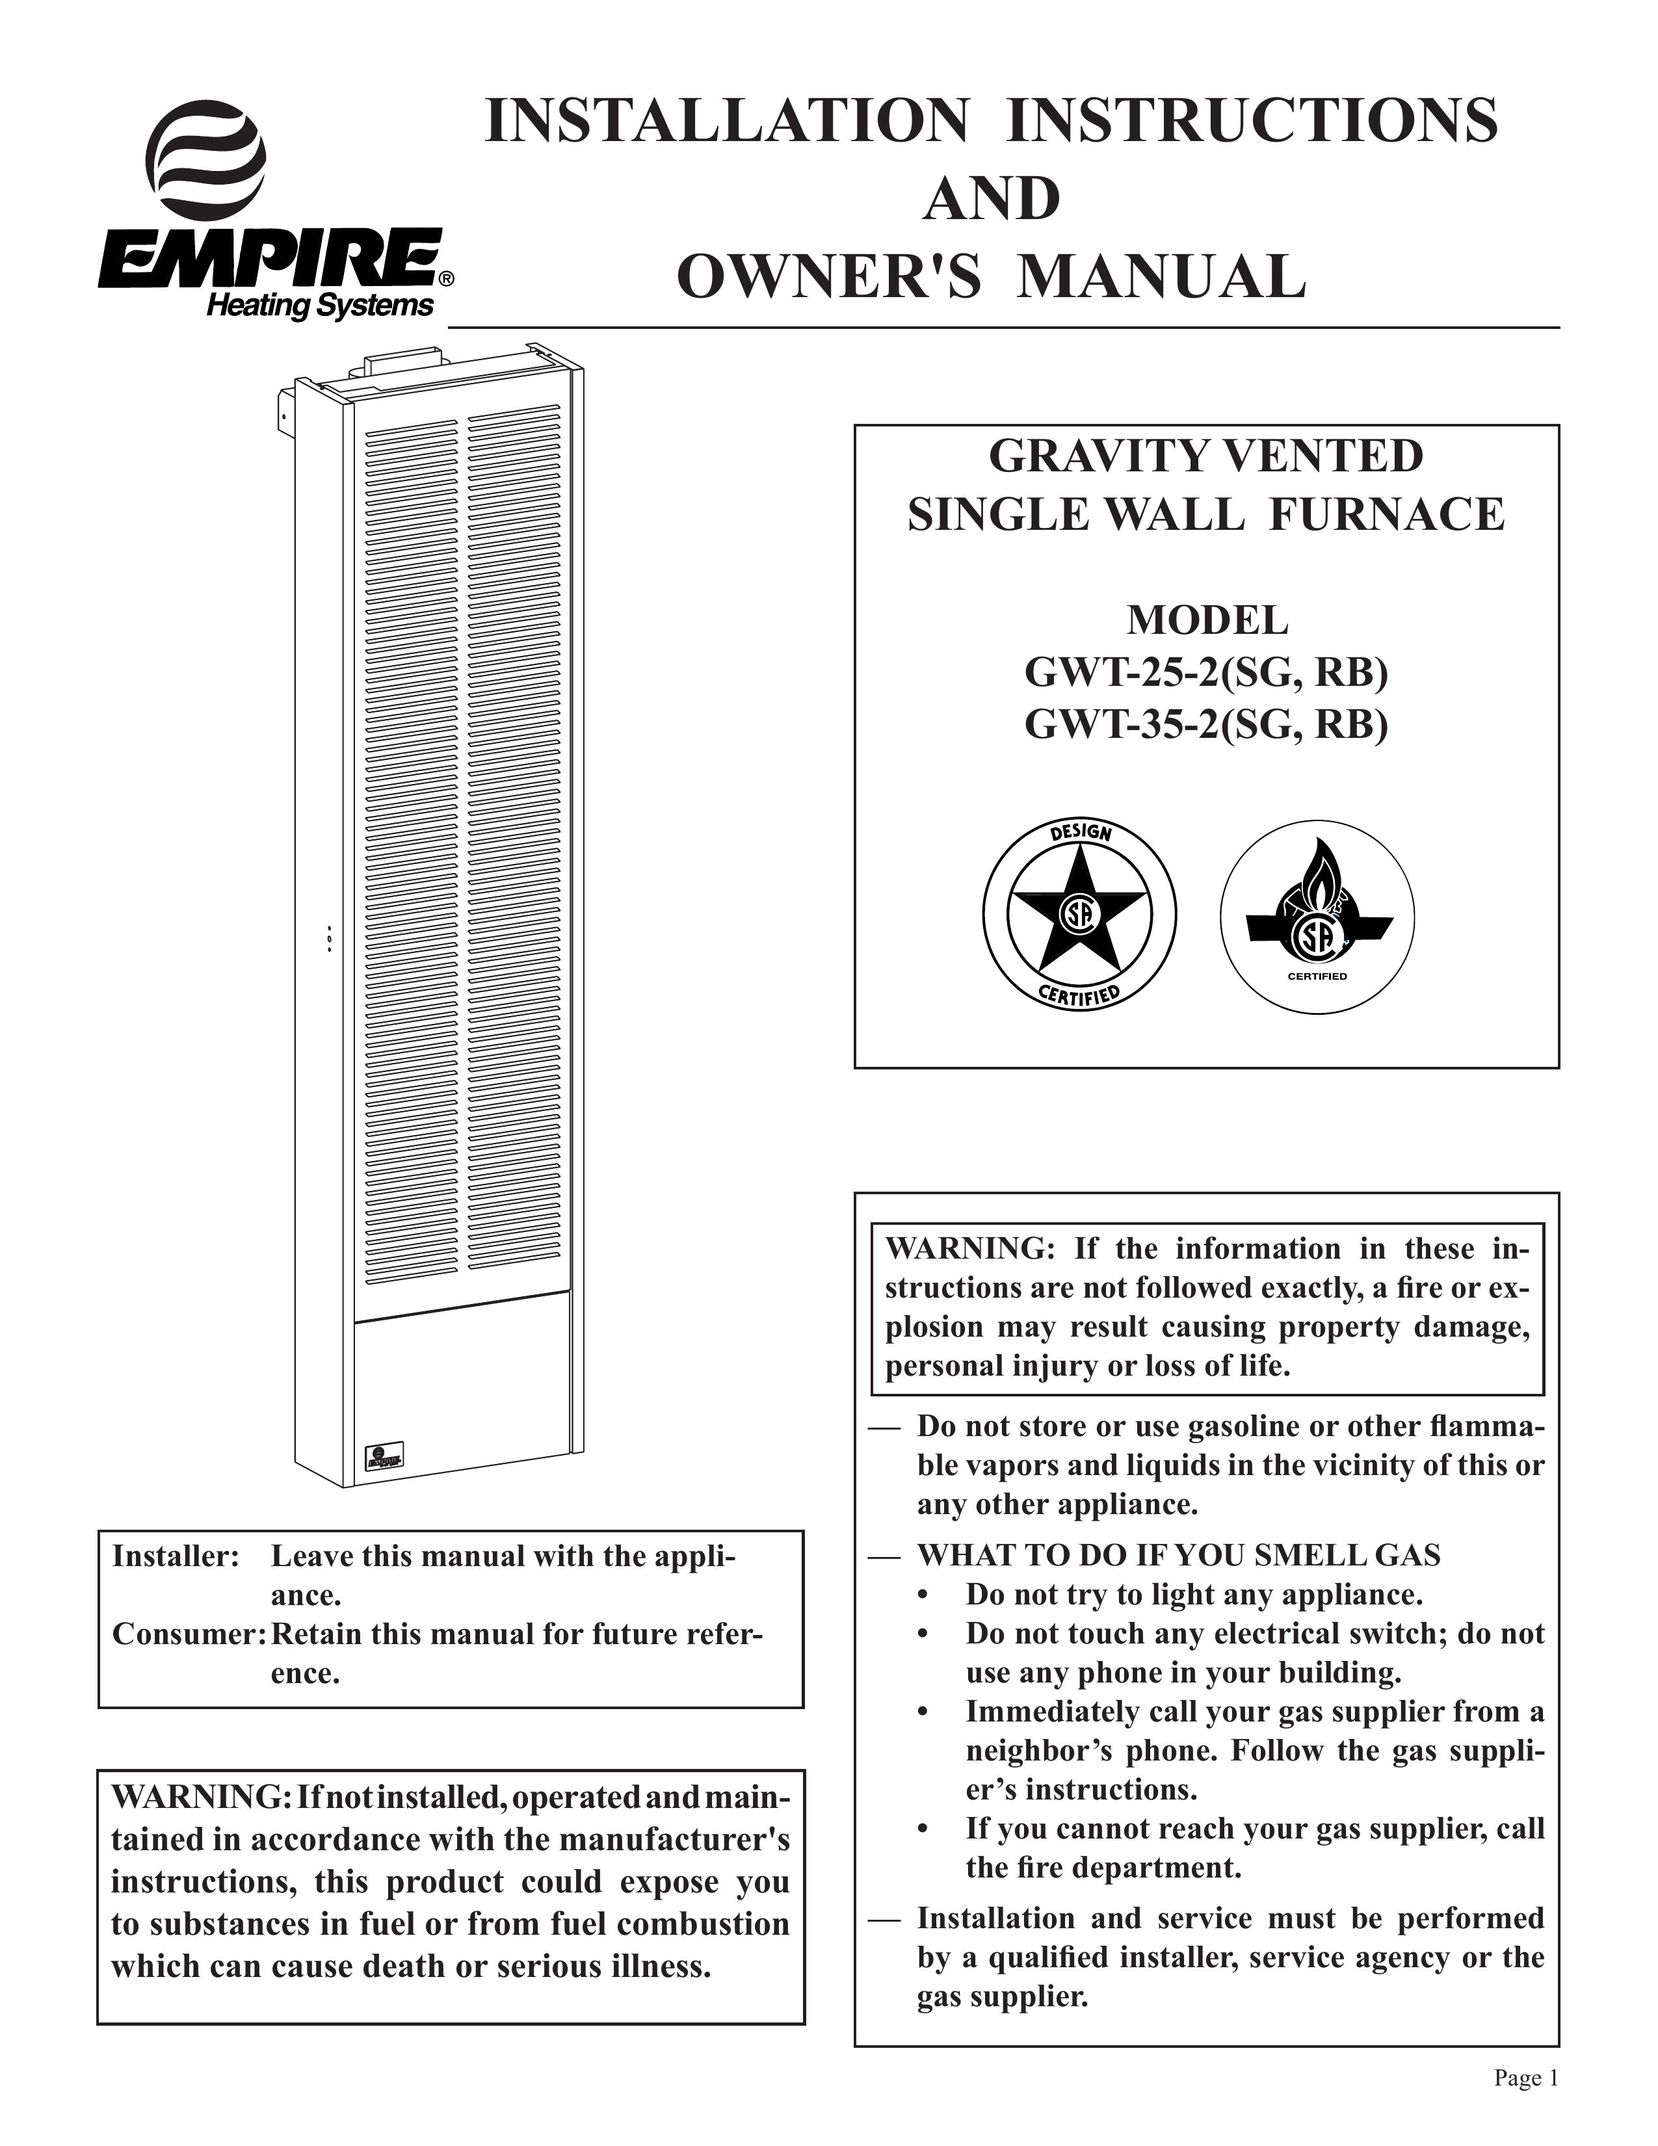 Empire Products GWT-35-2(SG Furnace User Manual